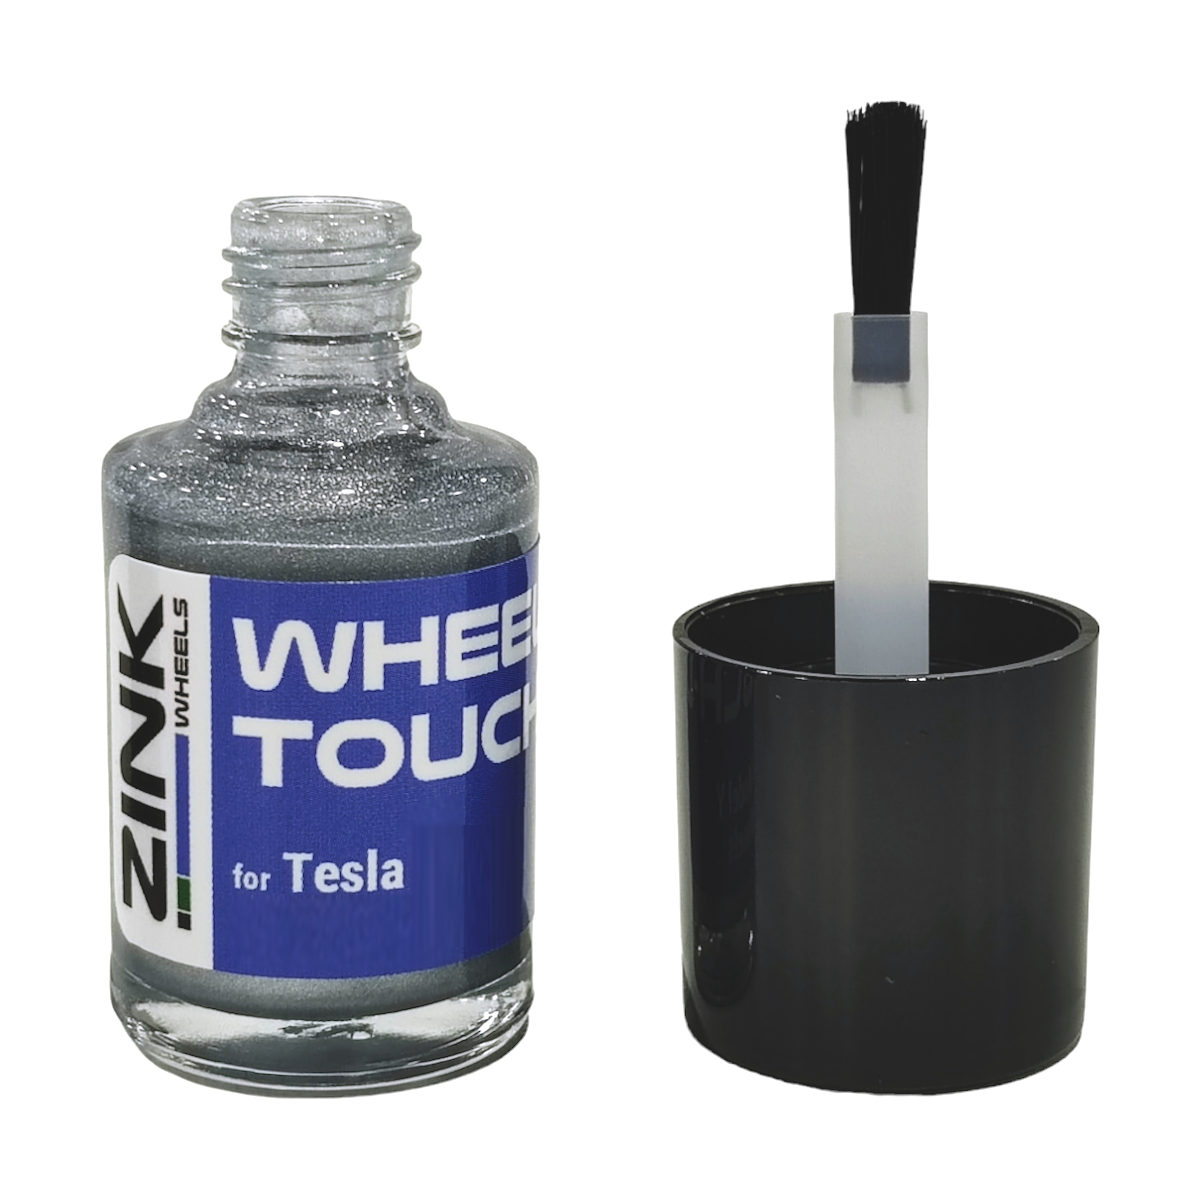 Tesla Wheel Touch-Up Paint for Model Y 19-inch Silver Gemini Rims - Color-matched Paint for DIY Curb Rash Repair